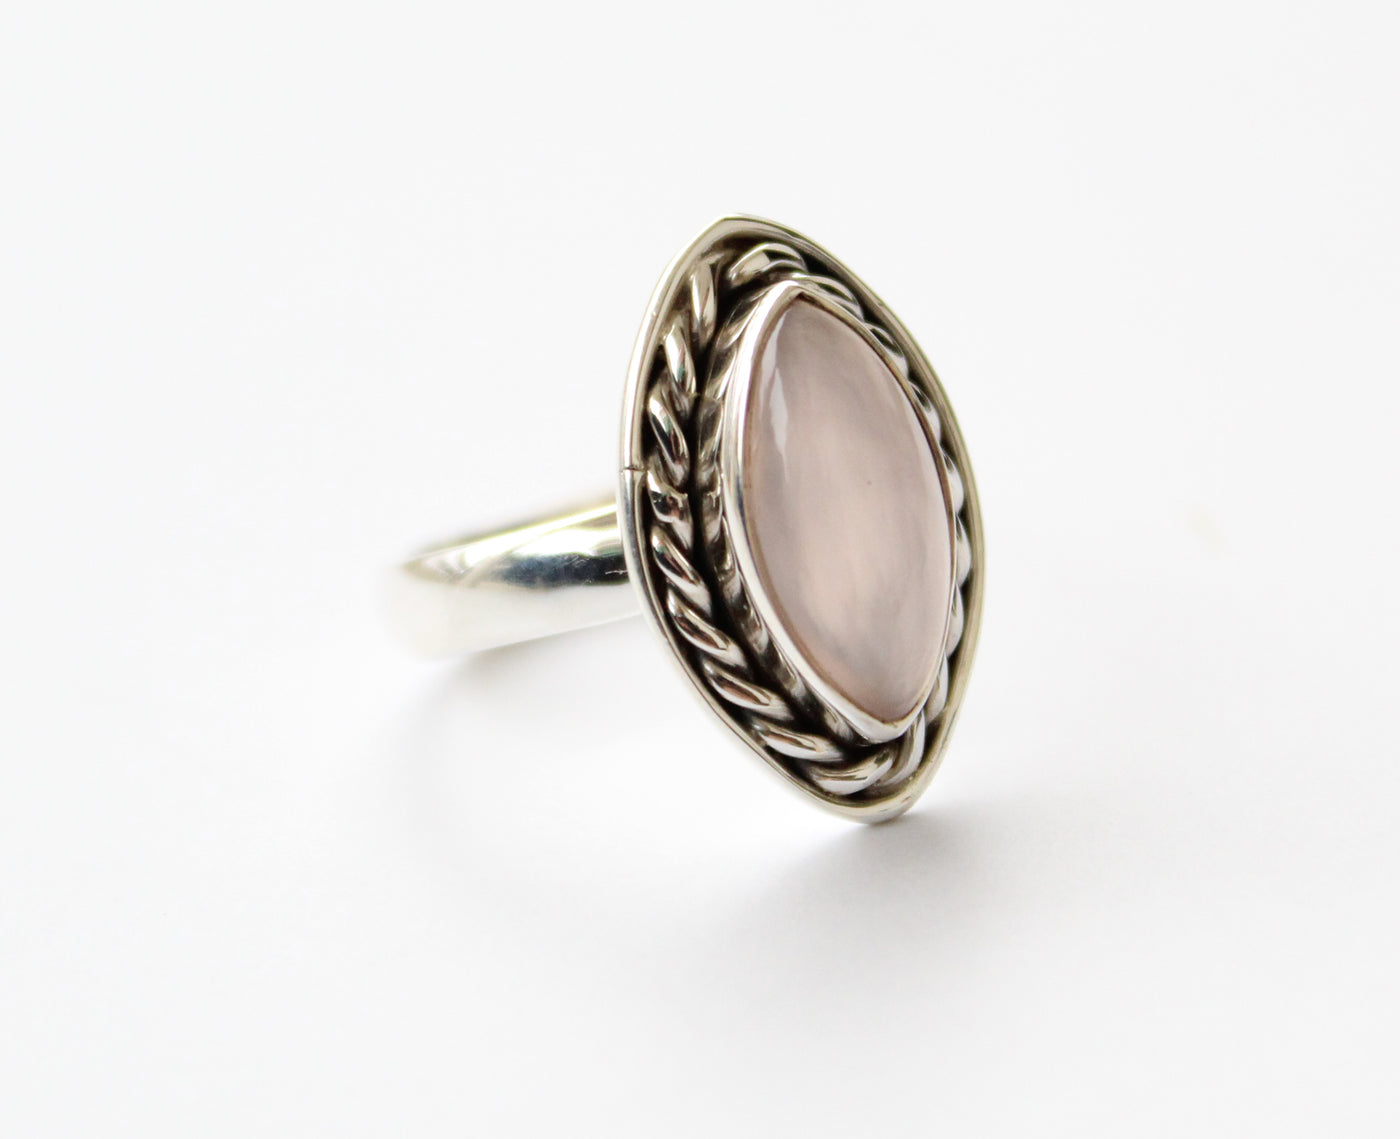 Pink Chalcedony Ring, Handmade Ring, 925 Sterling Silver, Statement Ring, Birthstone Jewelry, Pink Gemstone Ring, Free Shipping